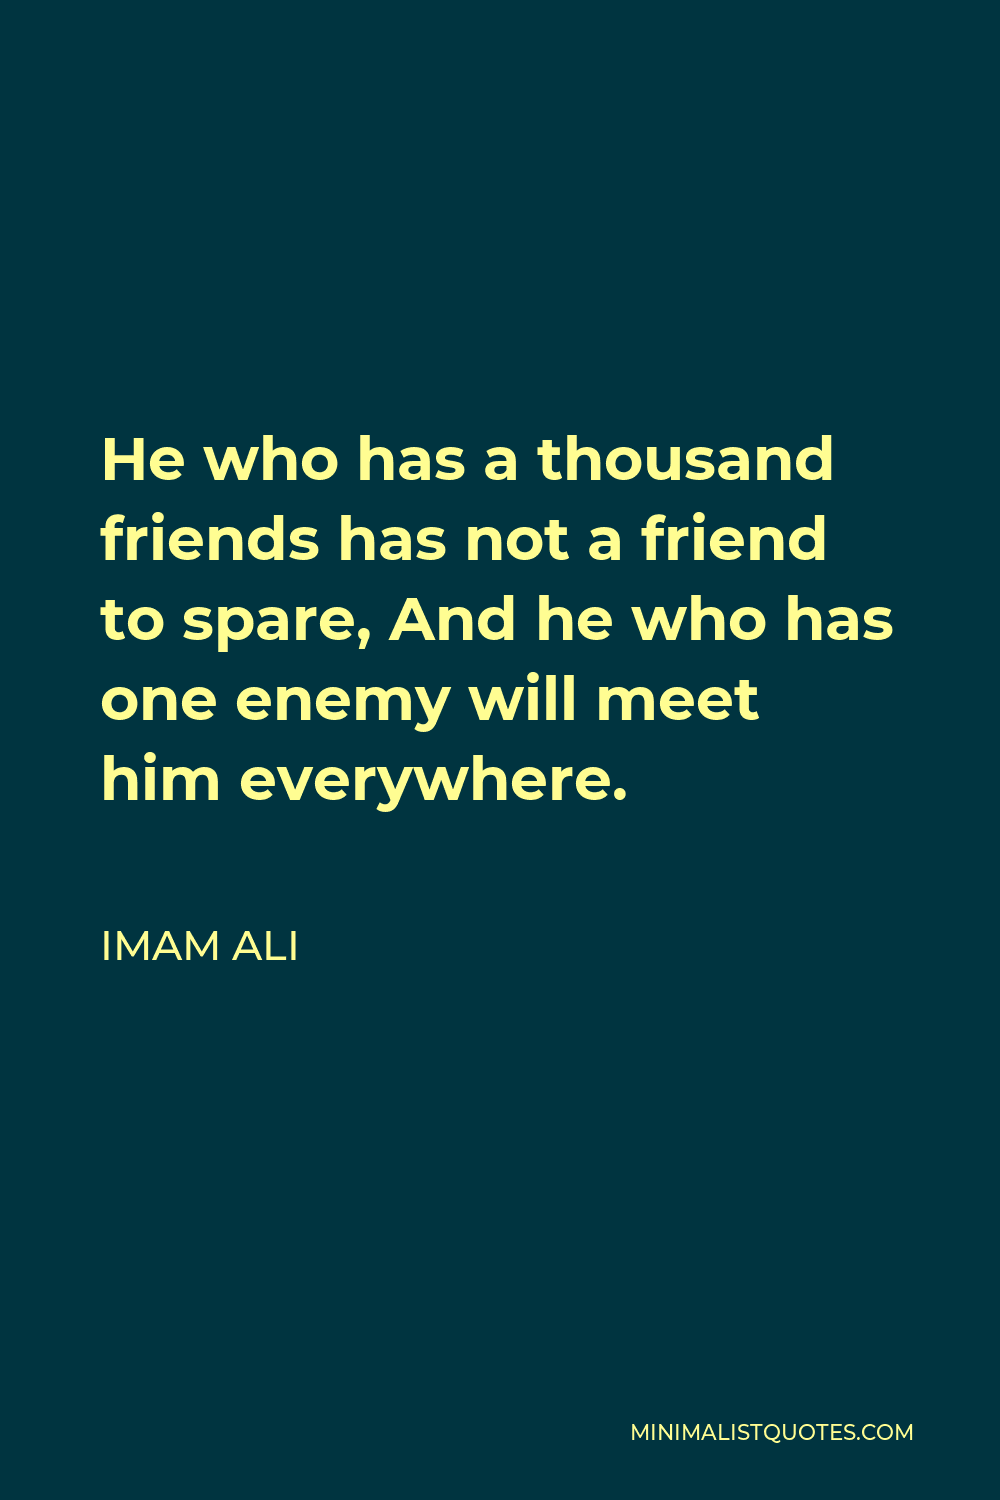 Imam Ali Quote - He who has a thousand friends has not a friend to spare, And he who has one enemy will meet him everywhere.